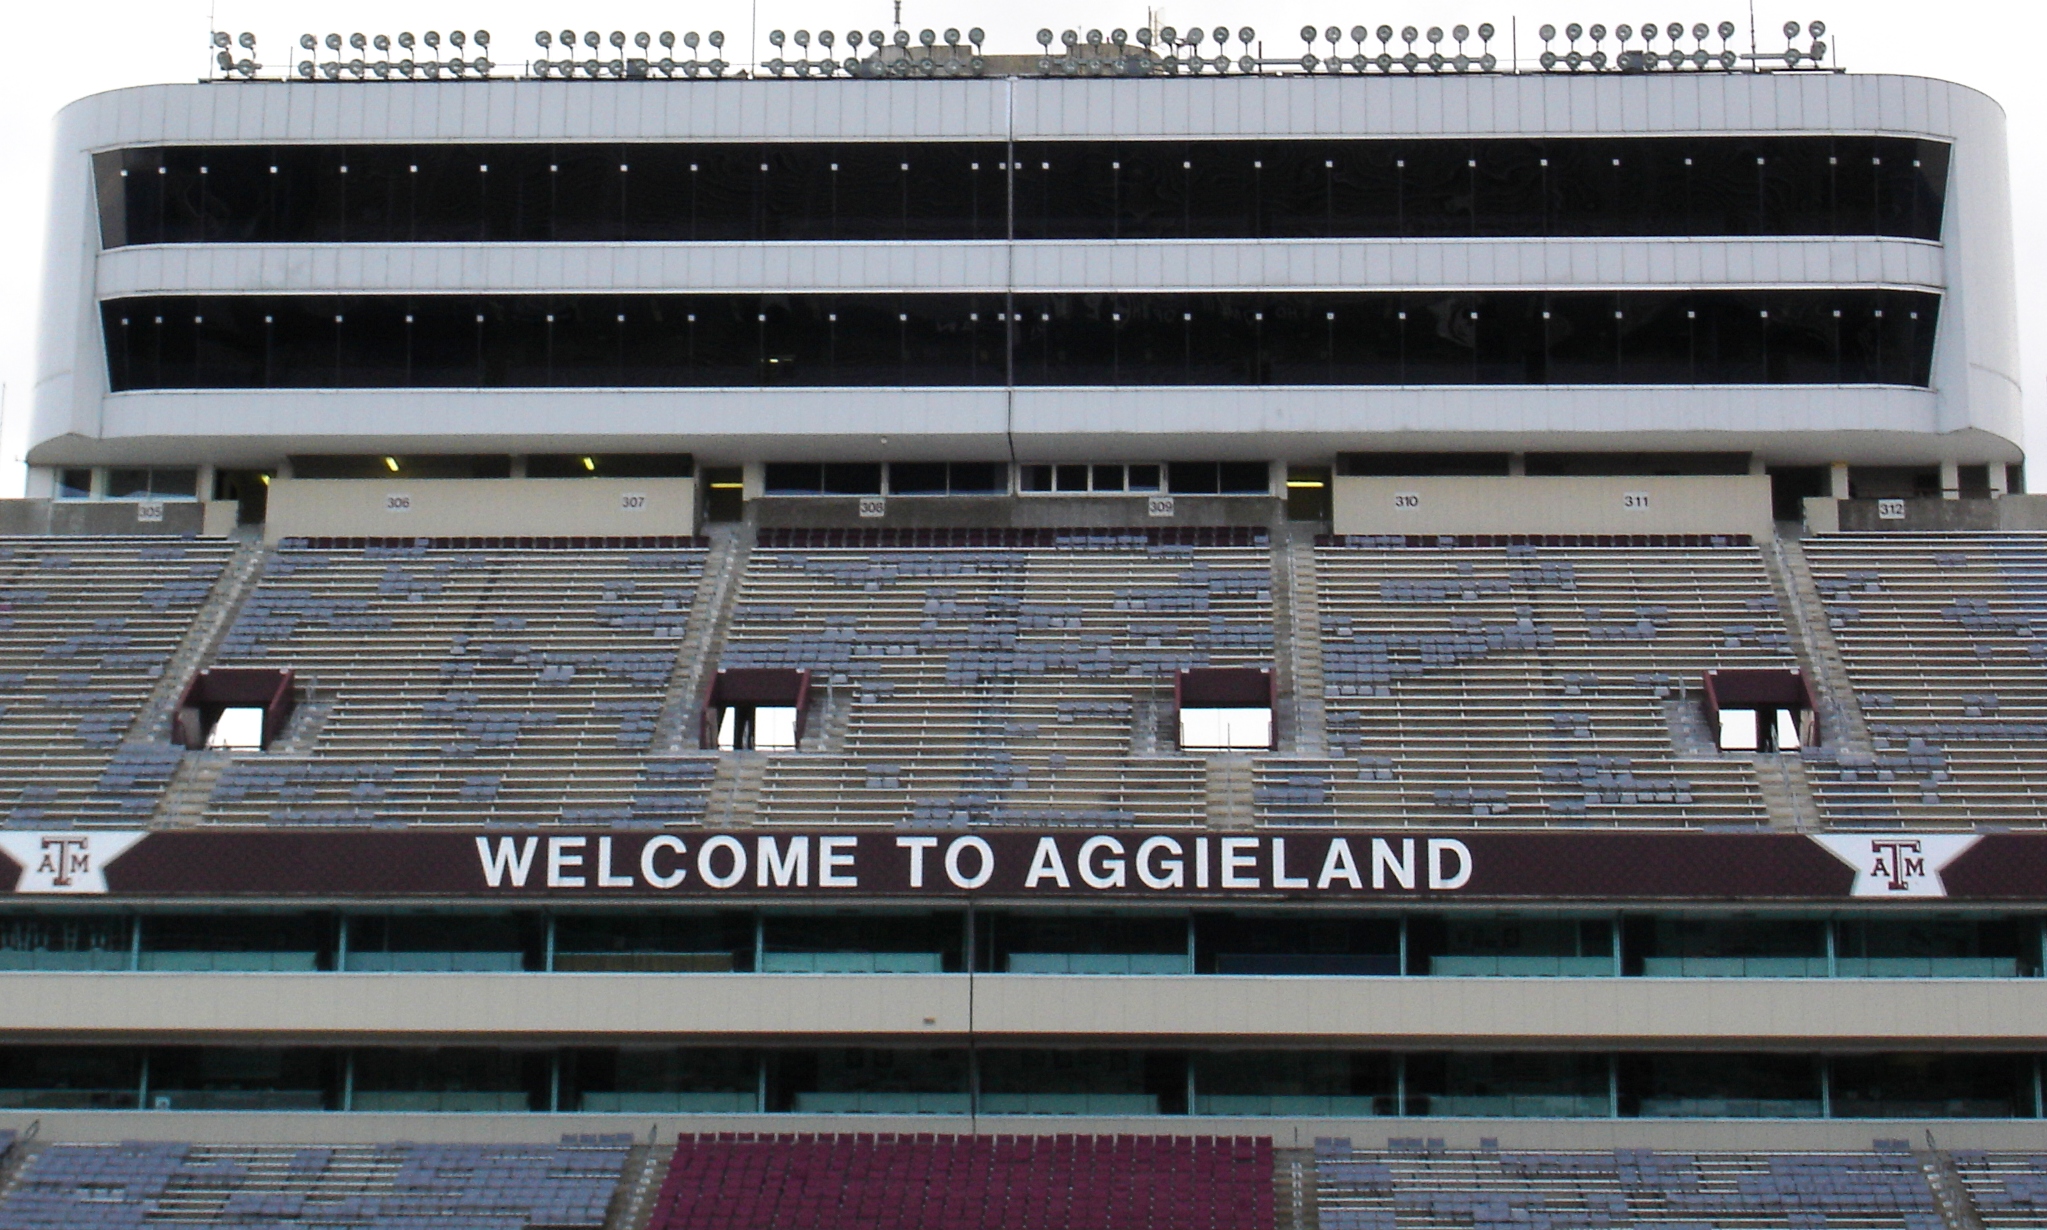 Kyle Field Redevelopment Seating Chart